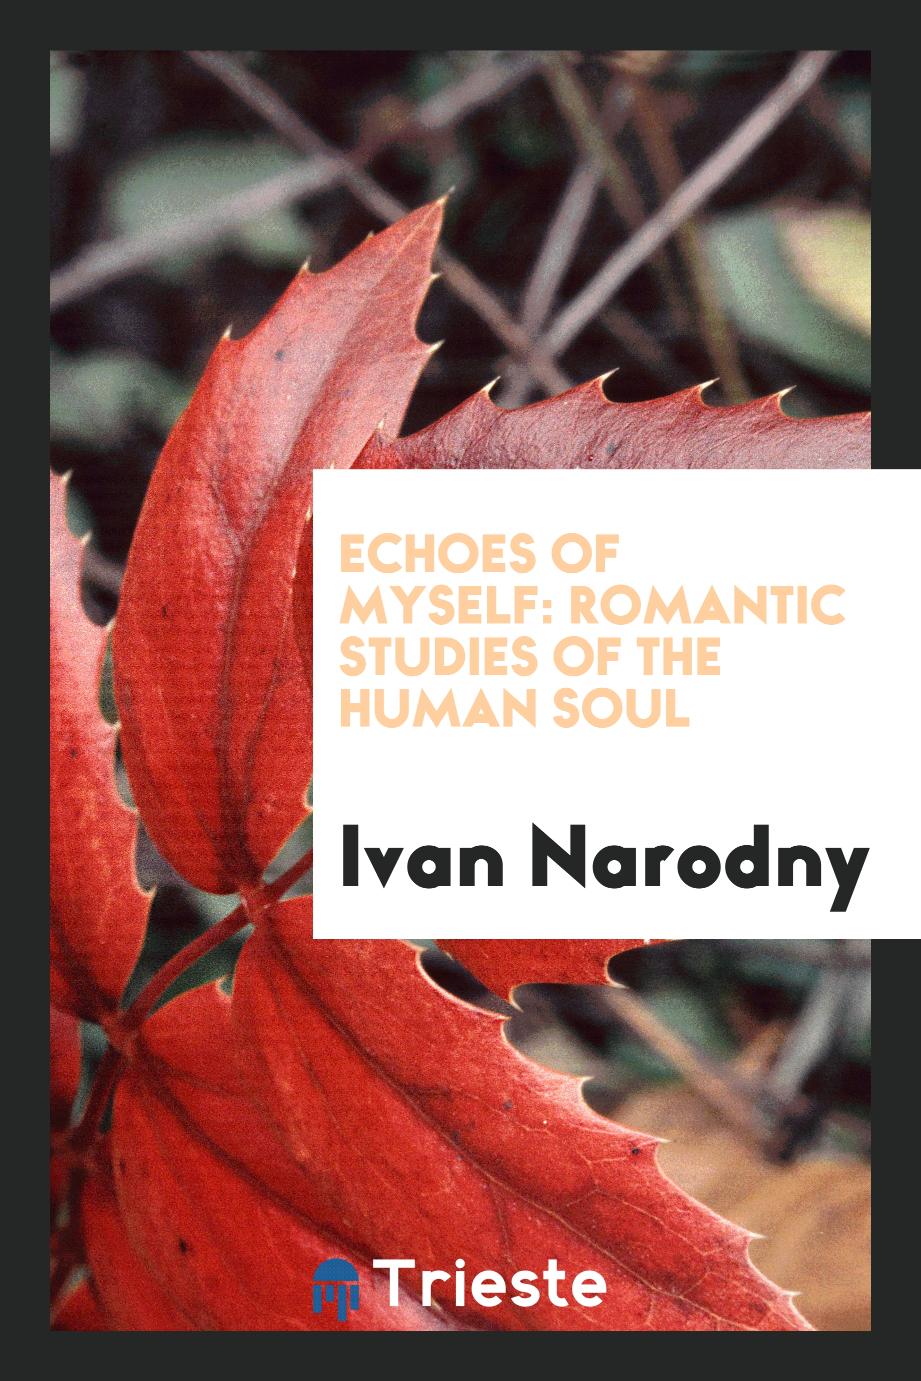 Echoes of Myself: Romantic Studies of the Human Soul